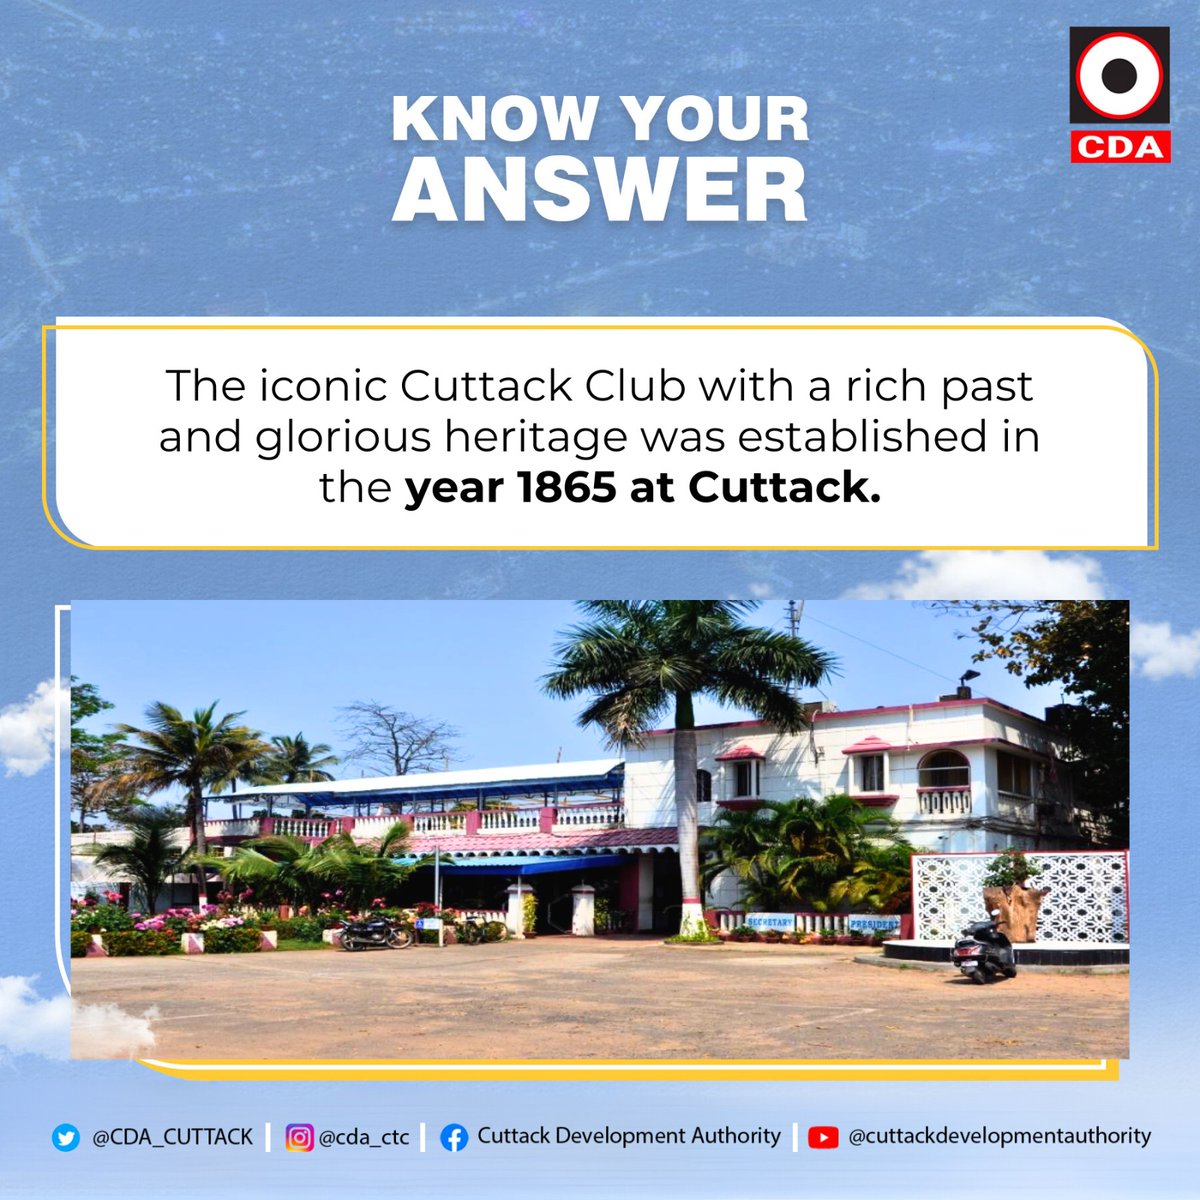 Let’s check your answer of the question asked last week.

#answer #quiz #CDA #QuizTime #engagement #fun #knowledge #facts #cuttack #cuttackclub